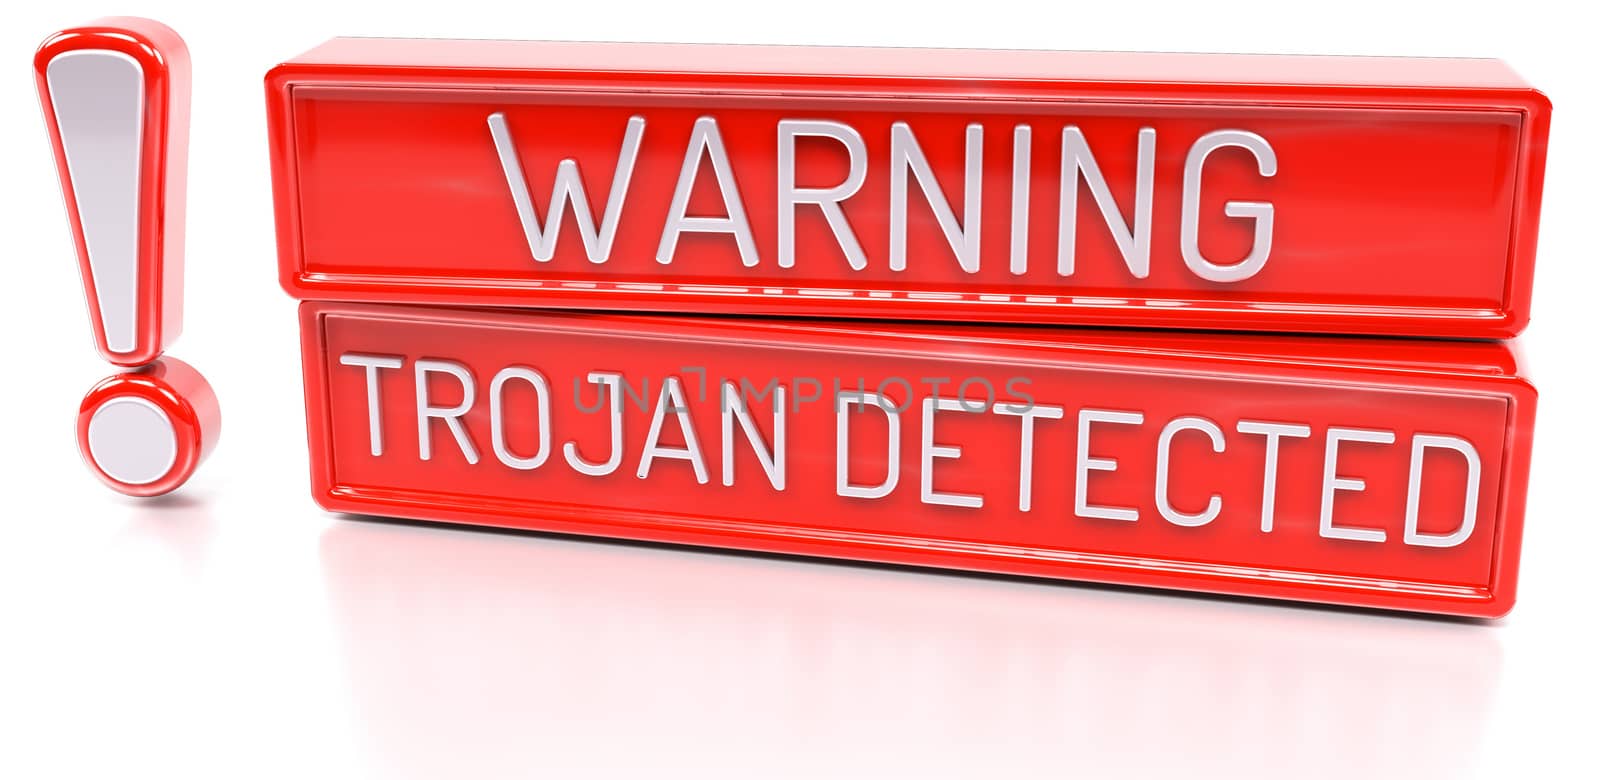 Warning Trojan Detected - 3d banner, isolated on white backgroun by akaprinay